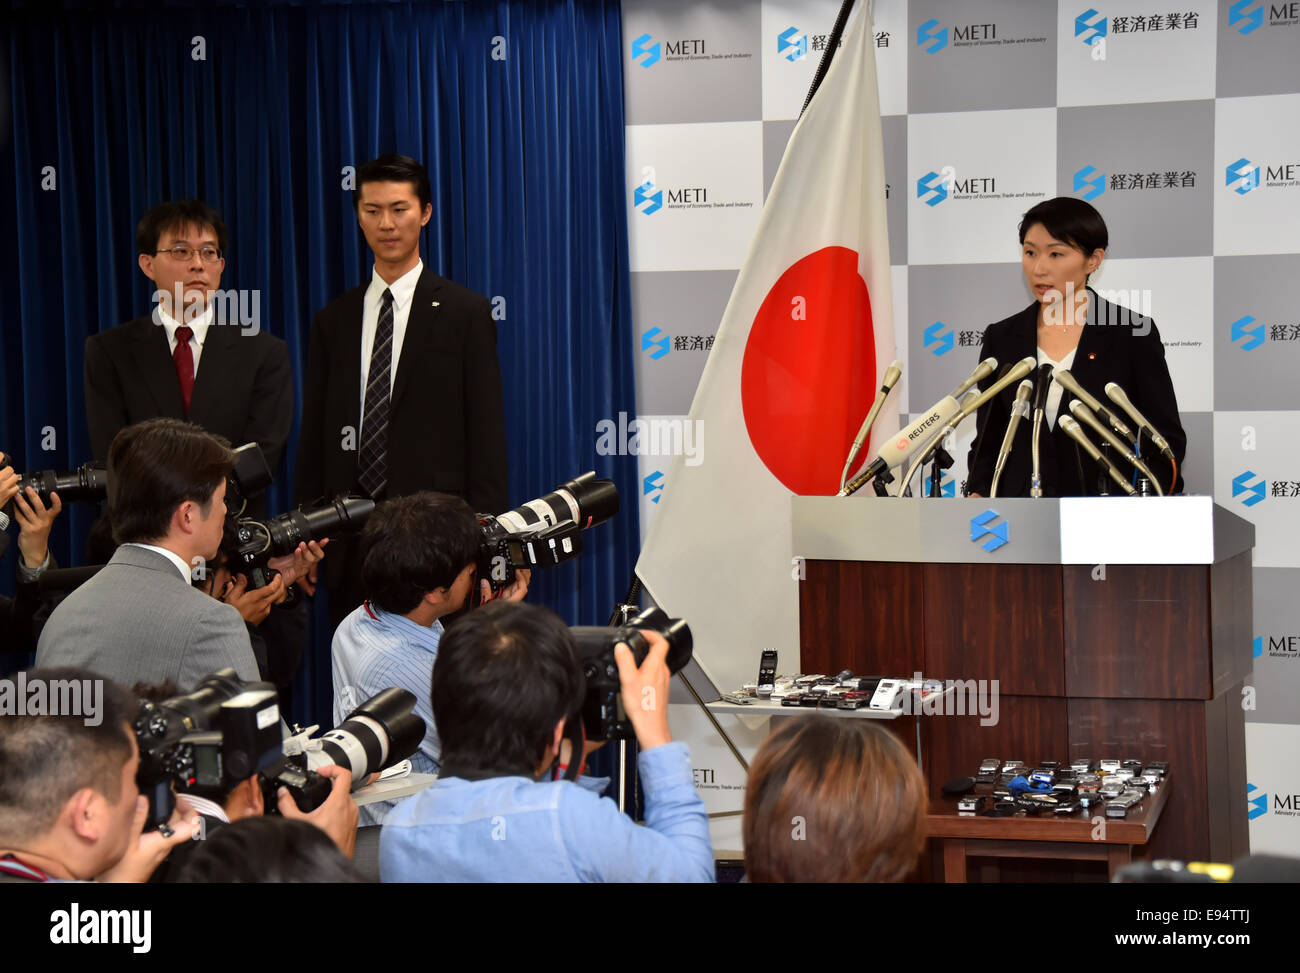 Tokyo, Japan. 20th Oct, 2014. Japan's Trade and Industry Minister Yuko Obuchi meets the media at the ministry in Tokyo on Monday, October 20, 2014. Obuchi, a daughter of late Prime Minister Keizo Obuchi, submitted her letter of resignation to Prime Minister Shinzo Abe, taking her responsibility over the alleged misuse of political funds. The resignation will deal a severe blow to Abe, who appointed five women as new Cabinet ministers when he reshuffled his Cabinet on Sept. 3 in his bid to underline his aim of promoting the status of women in Japan. Credit:  Natsuki Sakai/AFLO/Alamy Live News Stock Photo